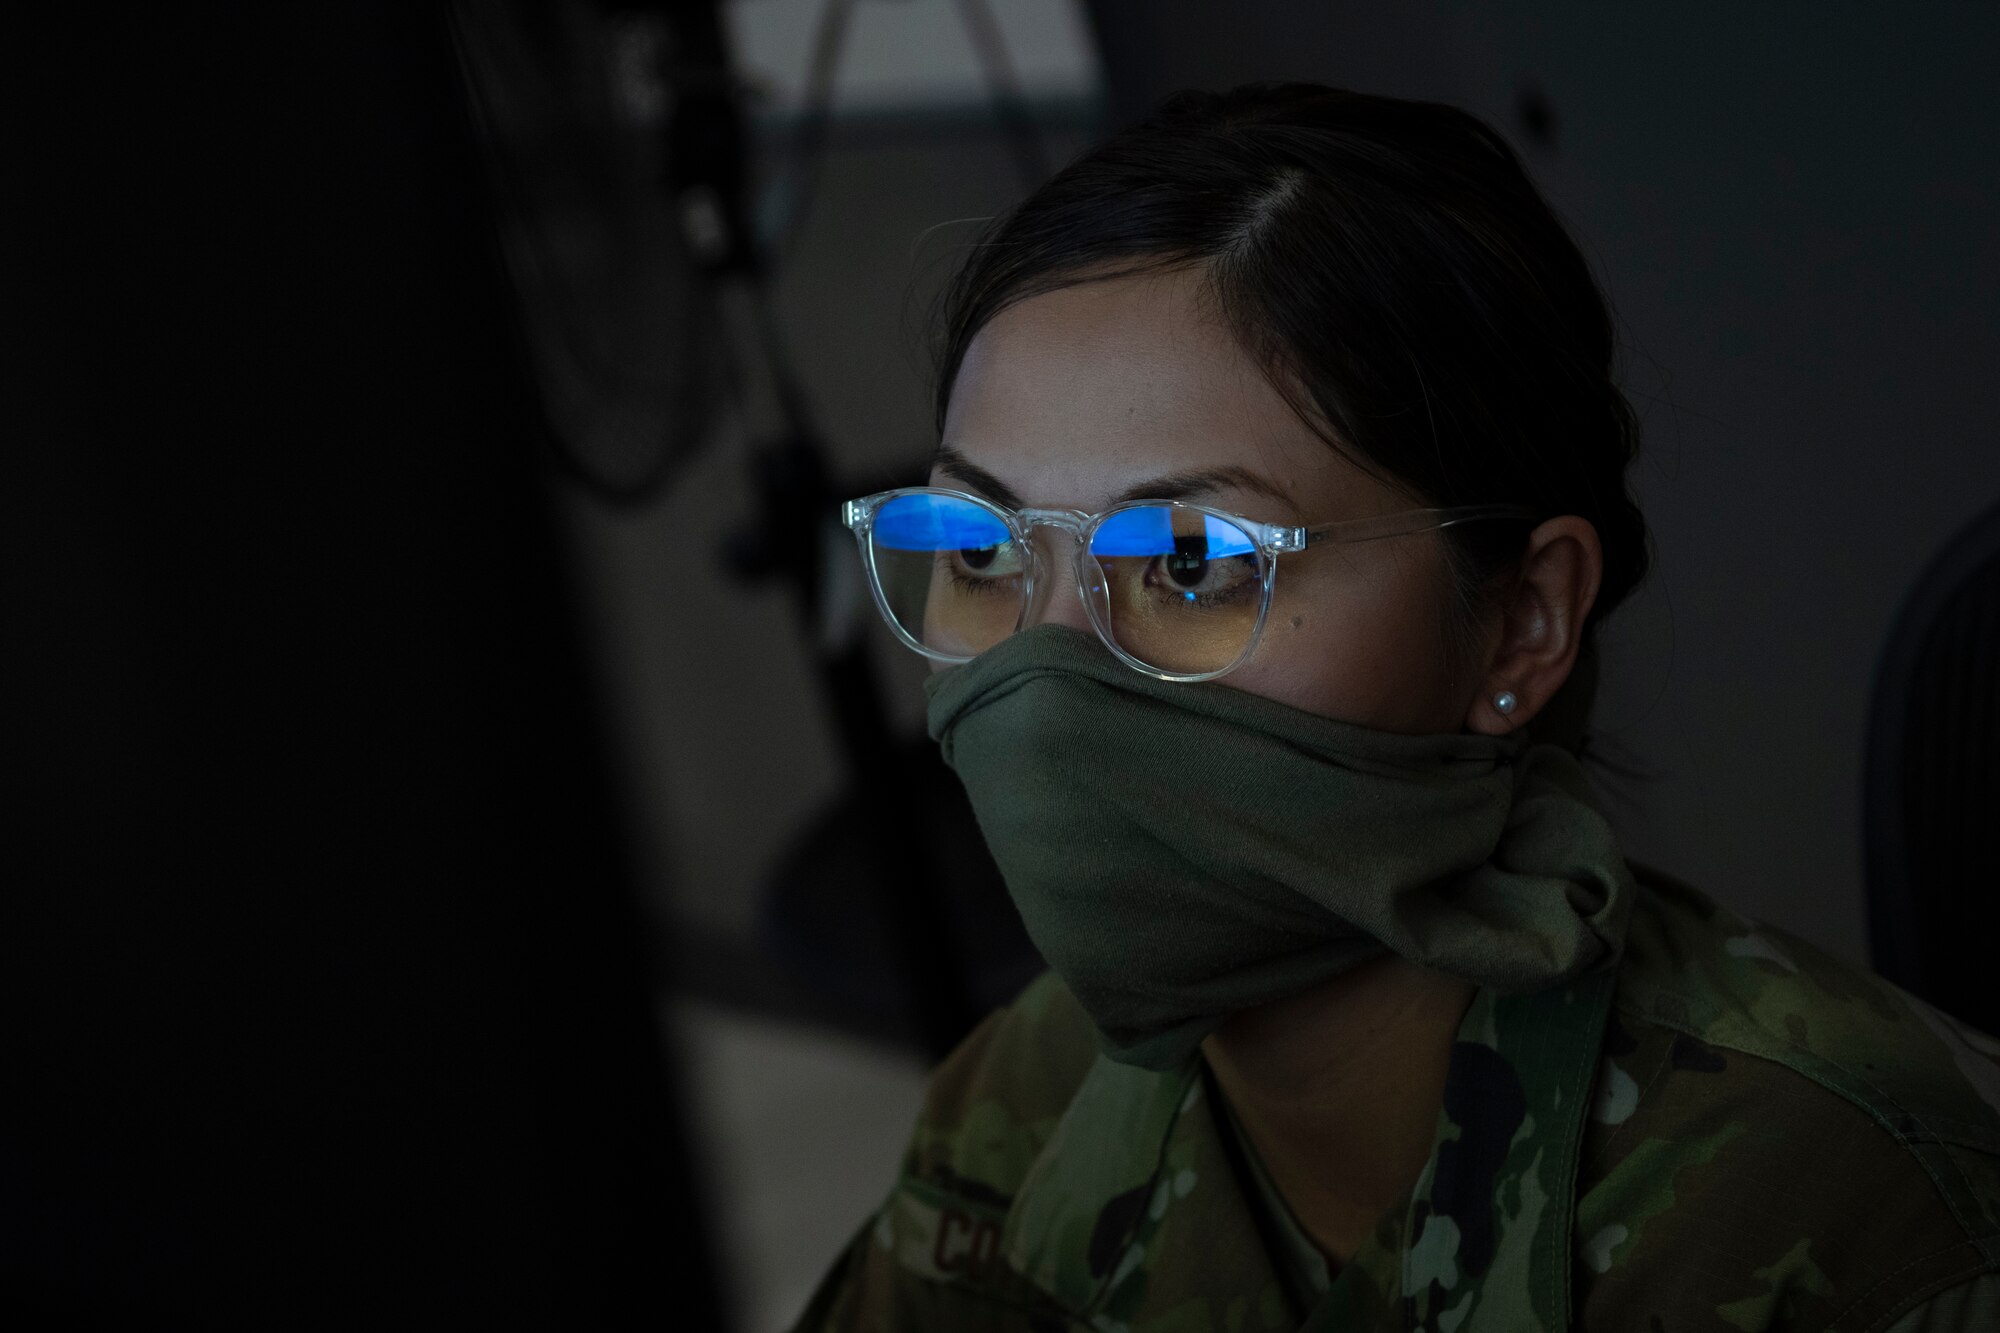 An Airman assigned to the 609th Air Operations Center performs tasks inside the Combined Air Operations Center at Al Udeid Air Base, Qatar, April 20, 2020.